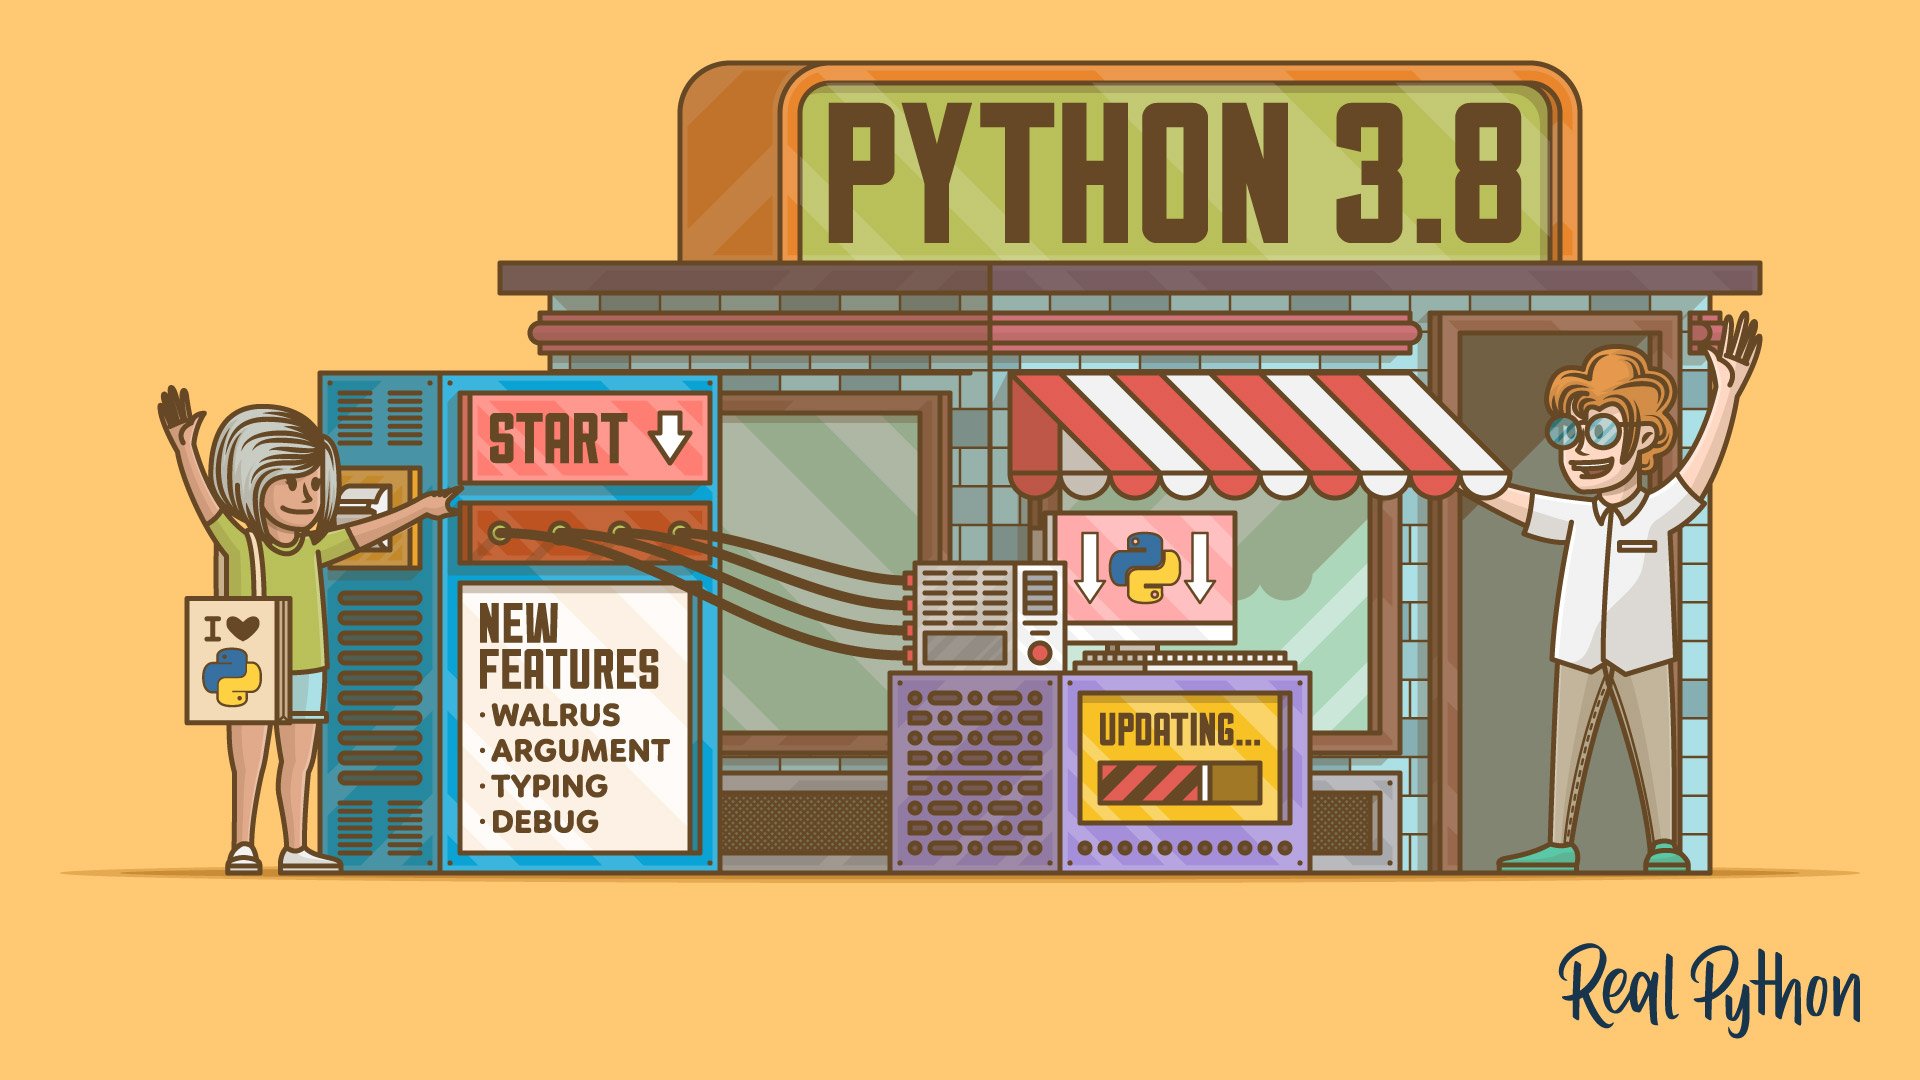 Cool New Features in Python 3.8